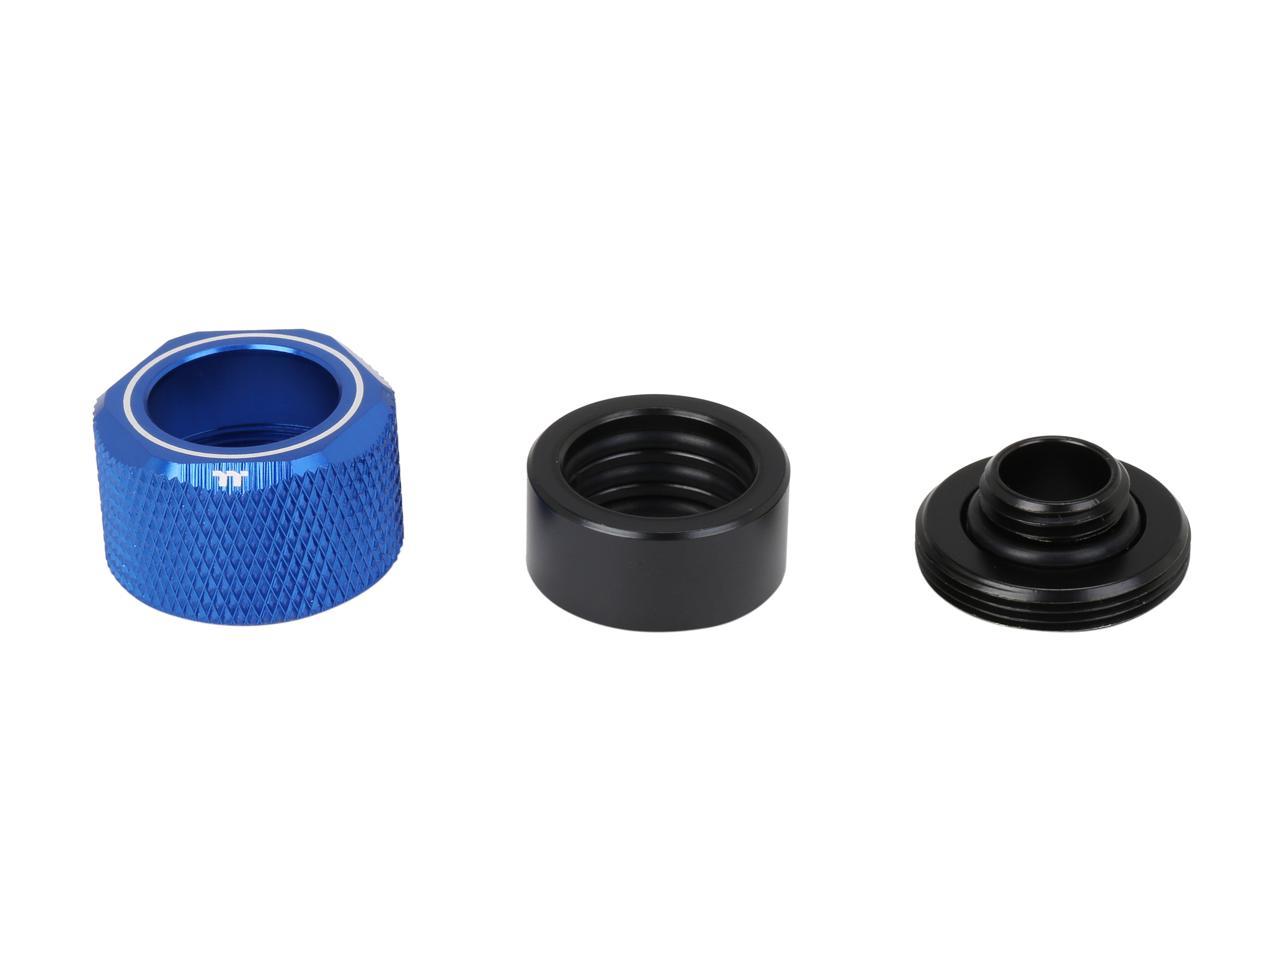 Thermaltake Pacific Blue 4 Build-in O-Rings C-Pro G1/4 PETG 16mm OD Compression Fitting 6 Pack CL-W210-CU00BU-B